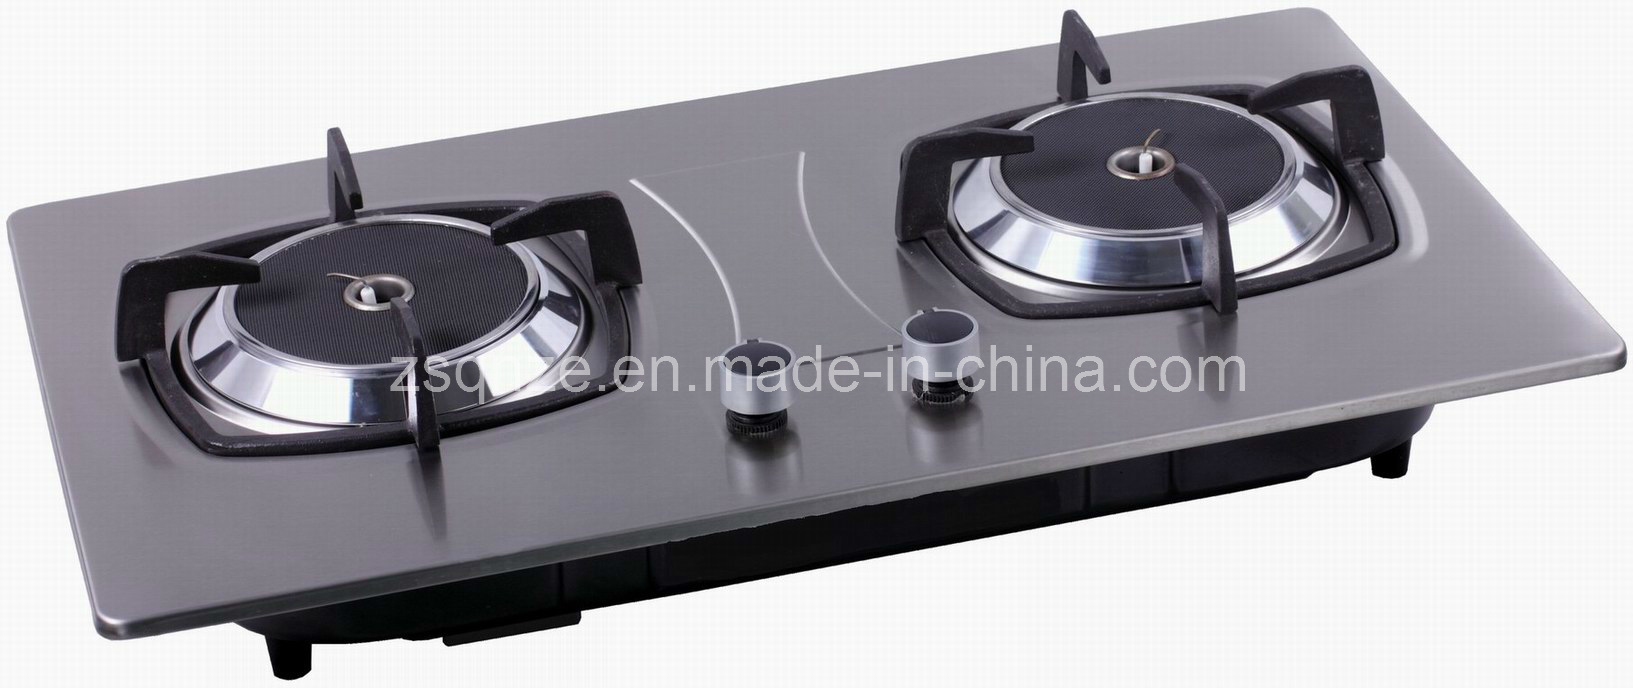 Infrared Burner Gas Stove_CH-BSI2002